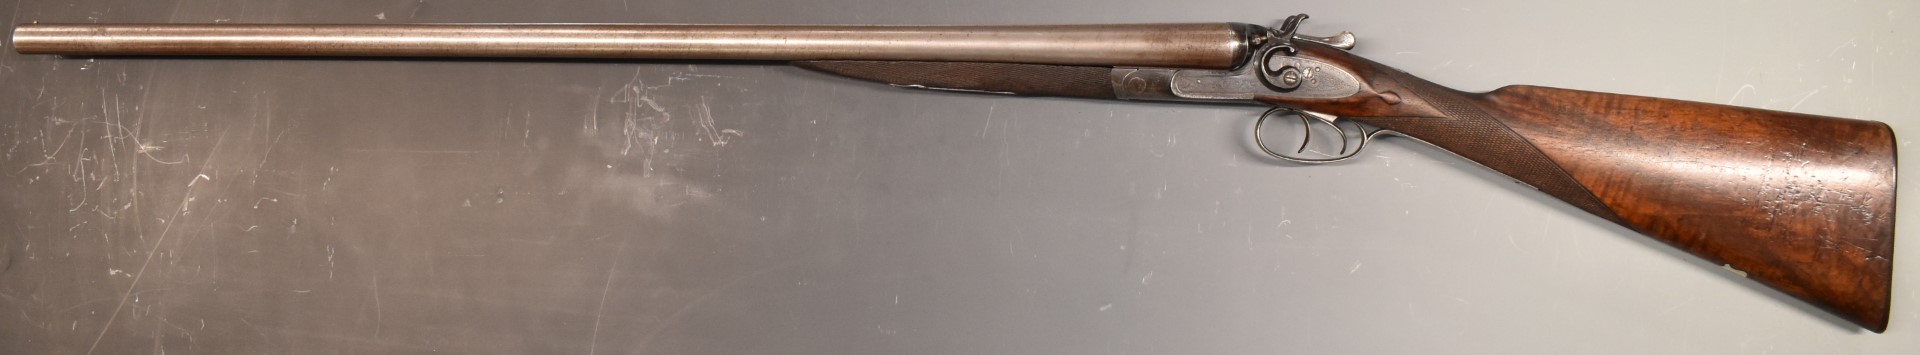 English 12 bore side by side hammer action shotgun with engraved locks, stylised hammers, trigger - Image 6 of 11